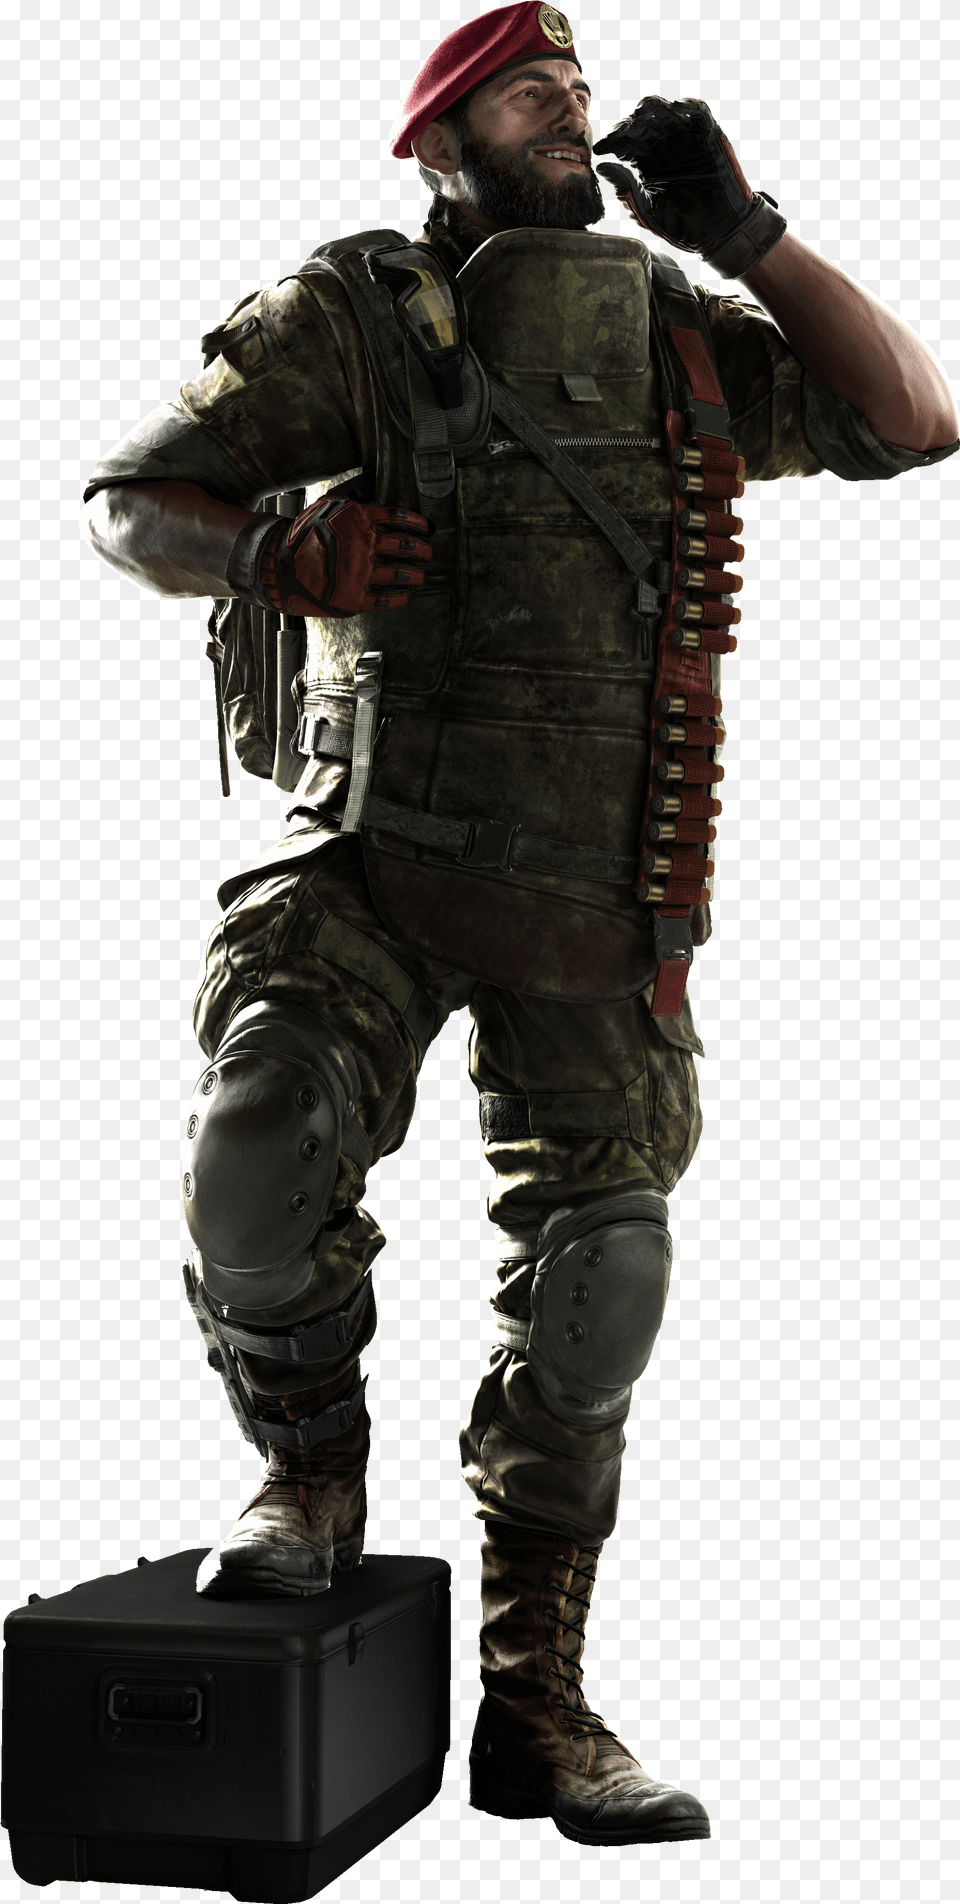 Maestro Rainbow Six Siege, Clothing, Glove, Adult, Person Png Image